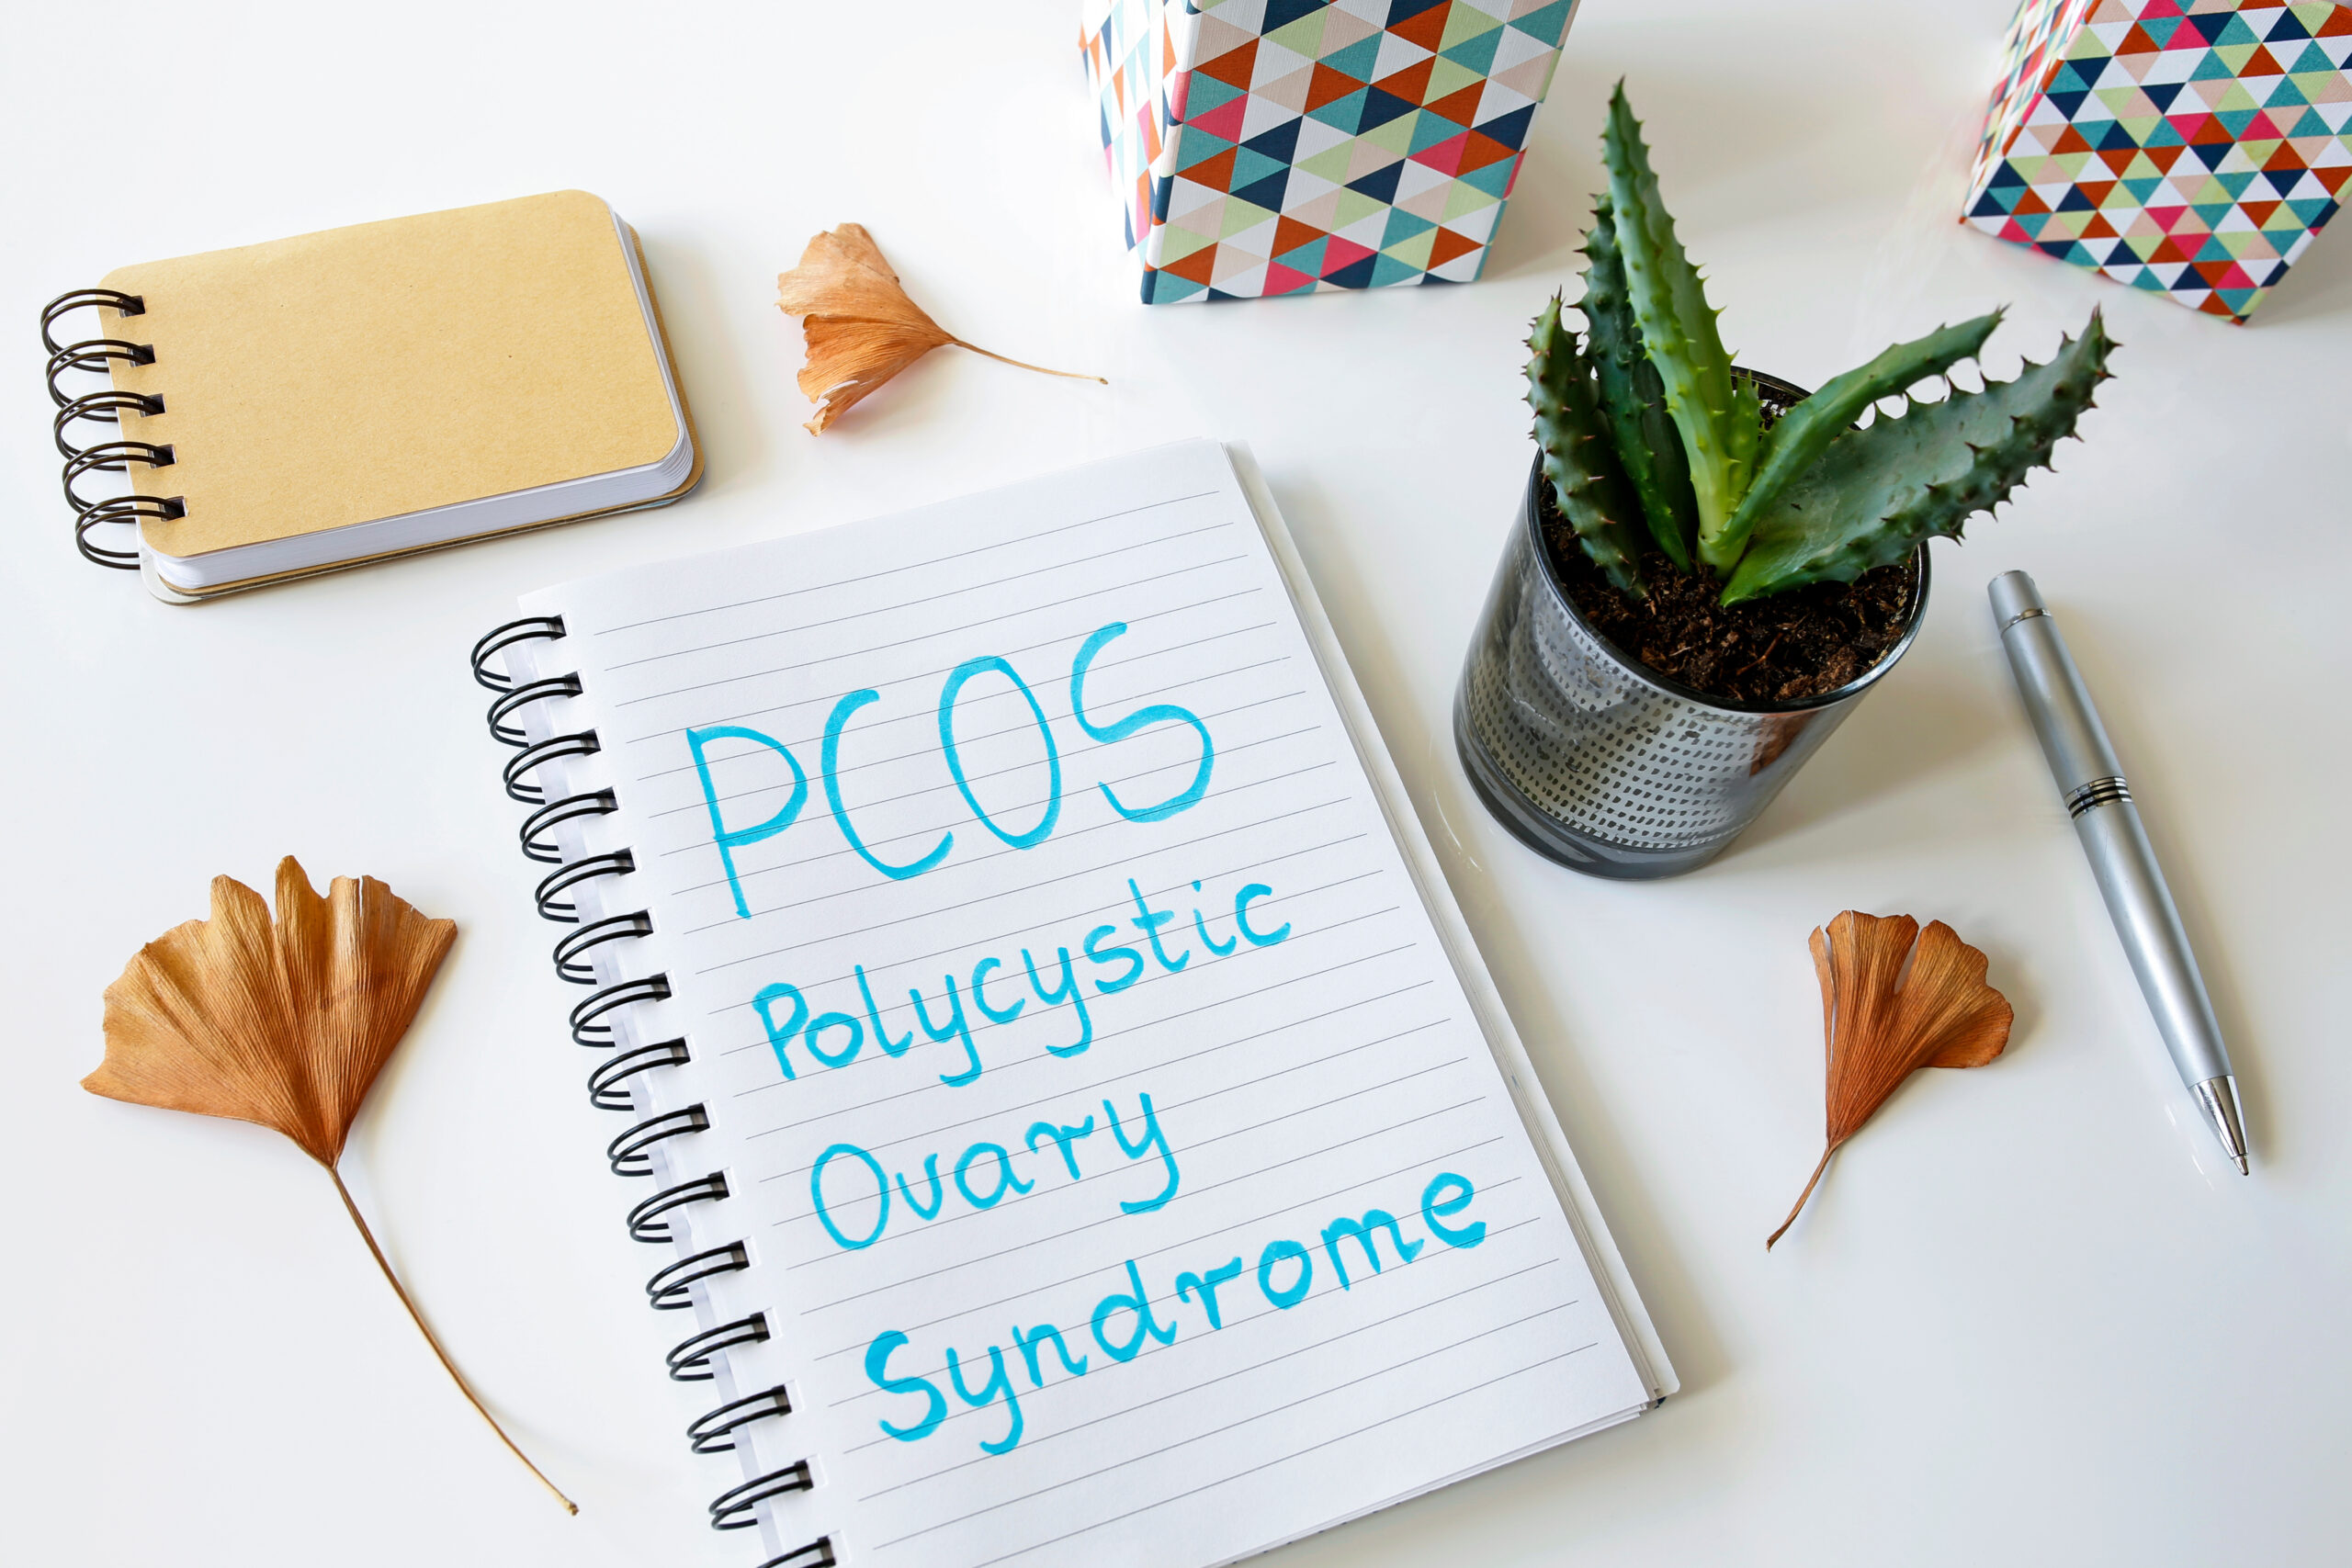 PCOS Polycystic ovary syndrome written in a notebook on white ta